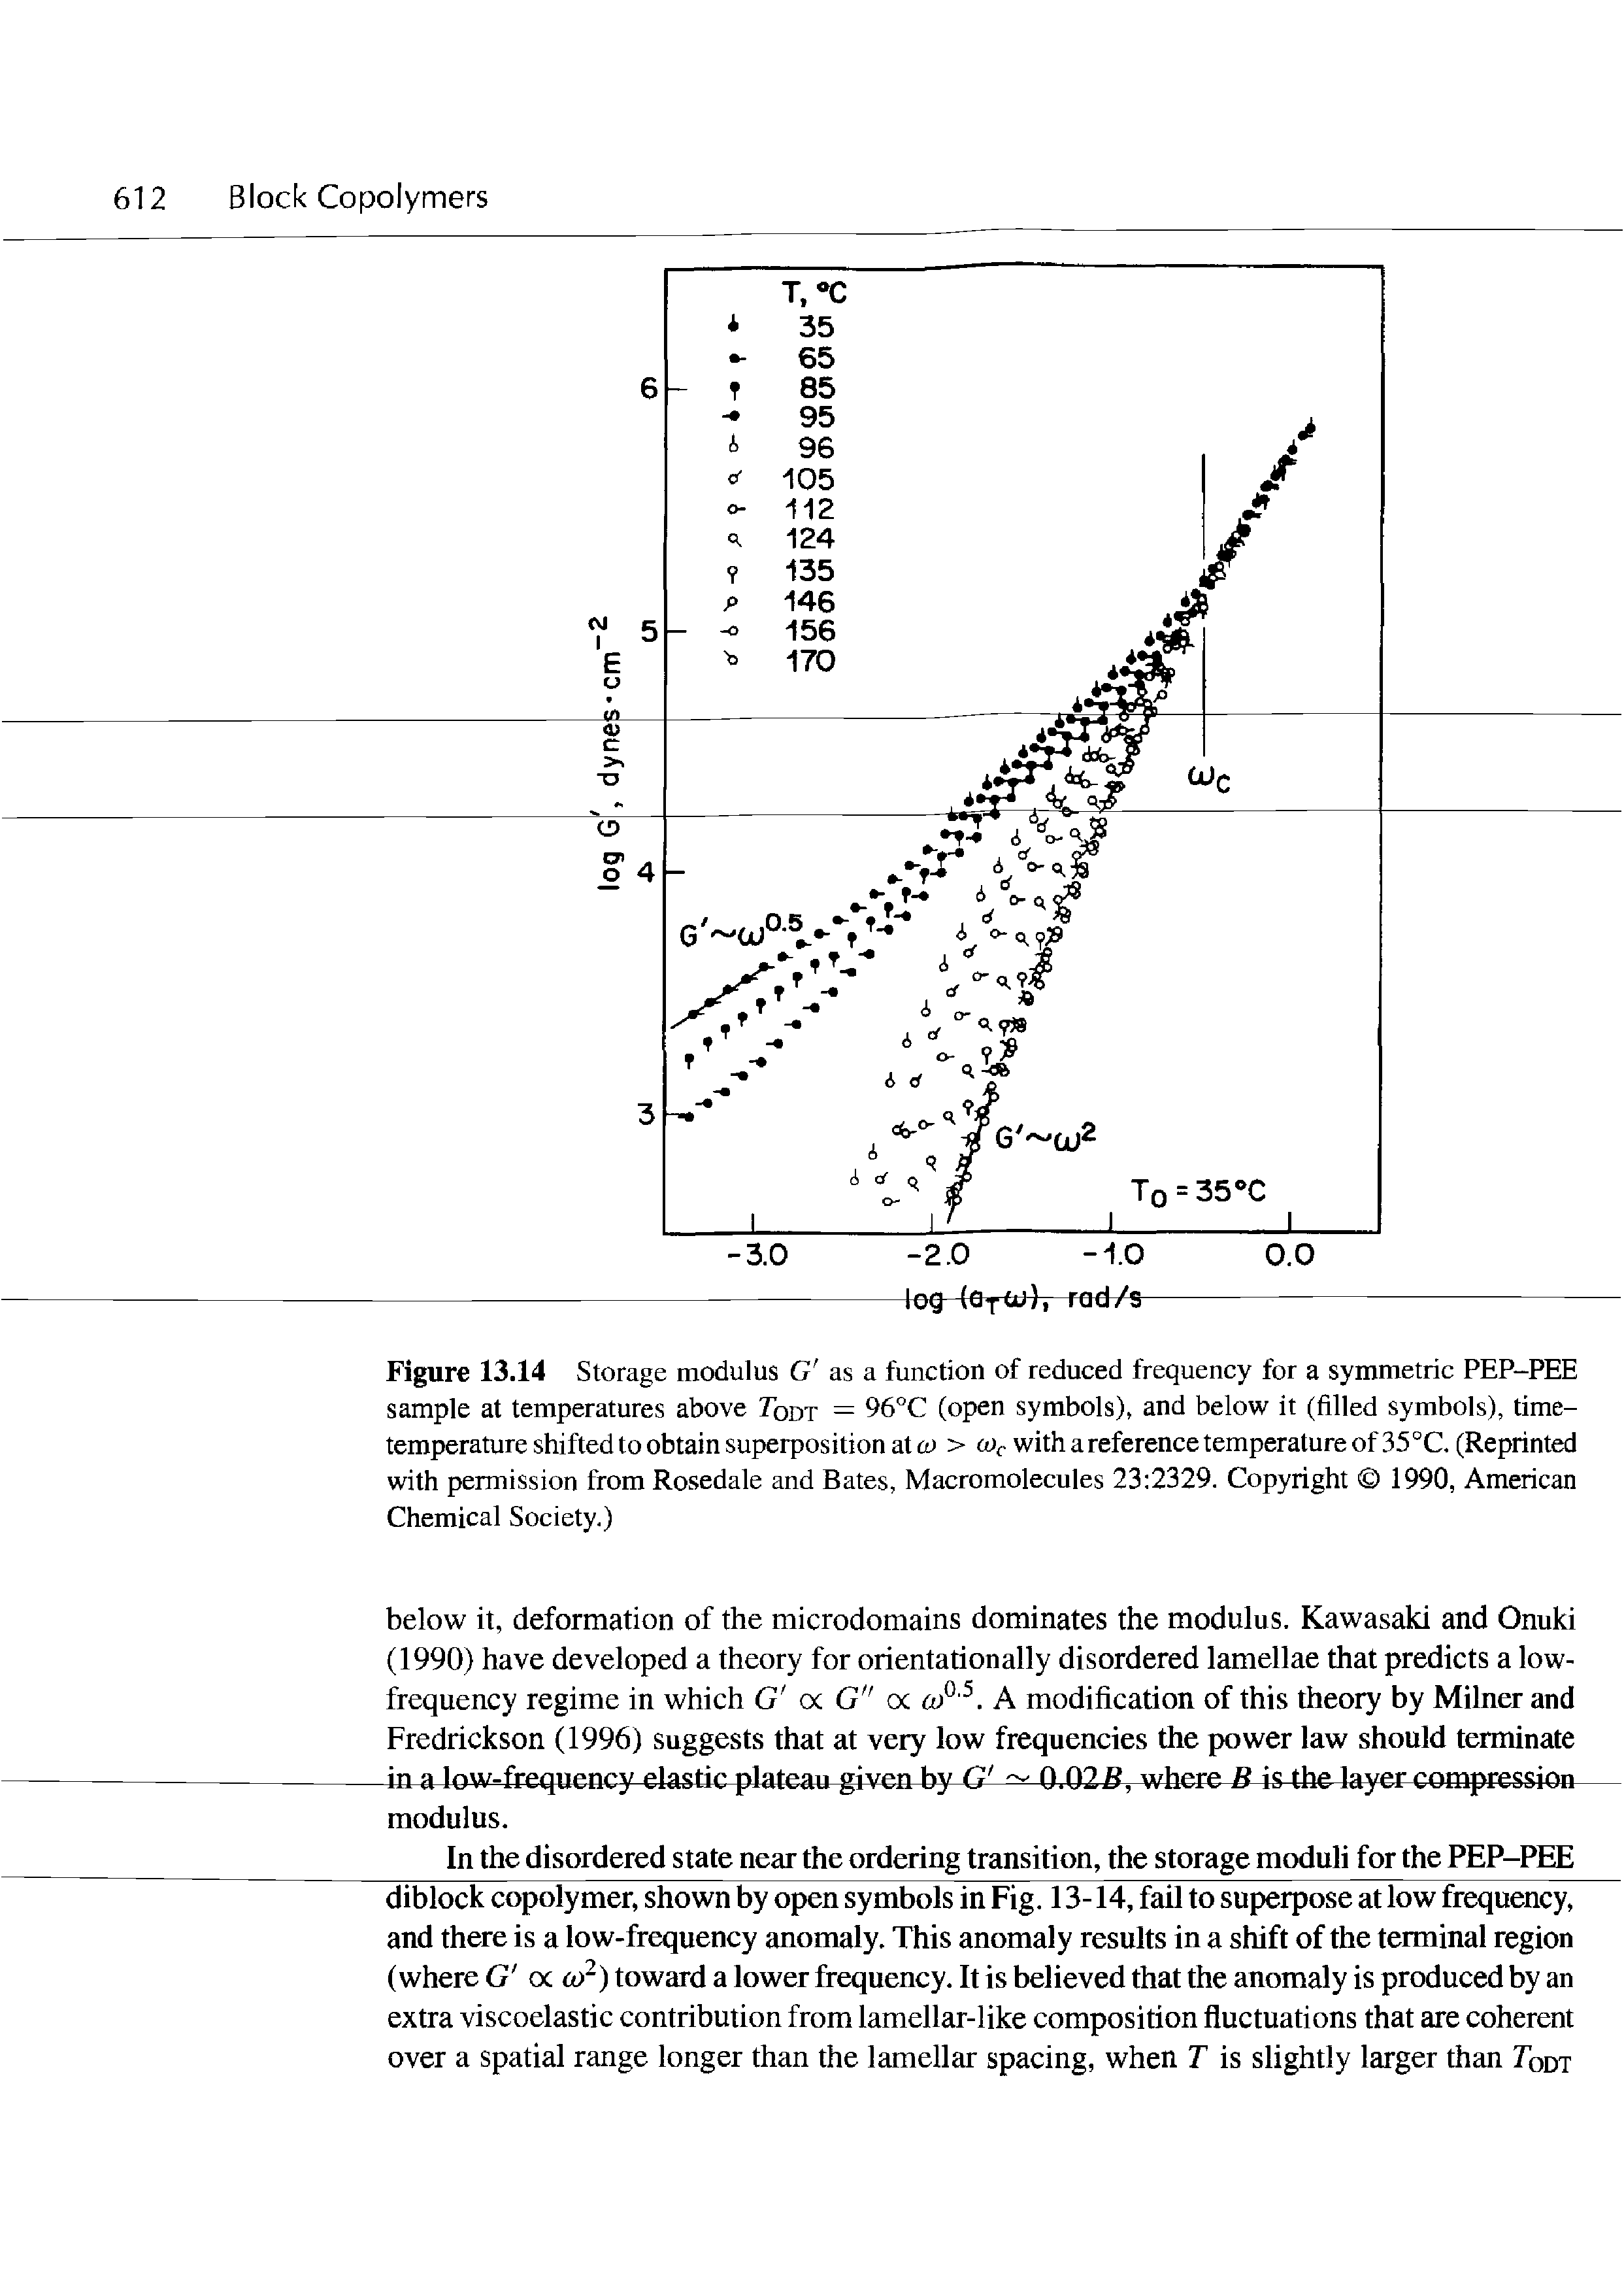 Figure 13.14 Storage modulus G as a function of reduced frequency for a symmetric PEP-PEE sample at temperatures above Toot = 96°C (open symbols), and below it (filled symbols), time-temperature shifted to obtain superposition atcu > o)c with a reference temperature of 35 °C. (Reprinted with permission from Rosedale and Bates, Macromolecules 23 2329. Copyright 1990, American Chemical Society.)...